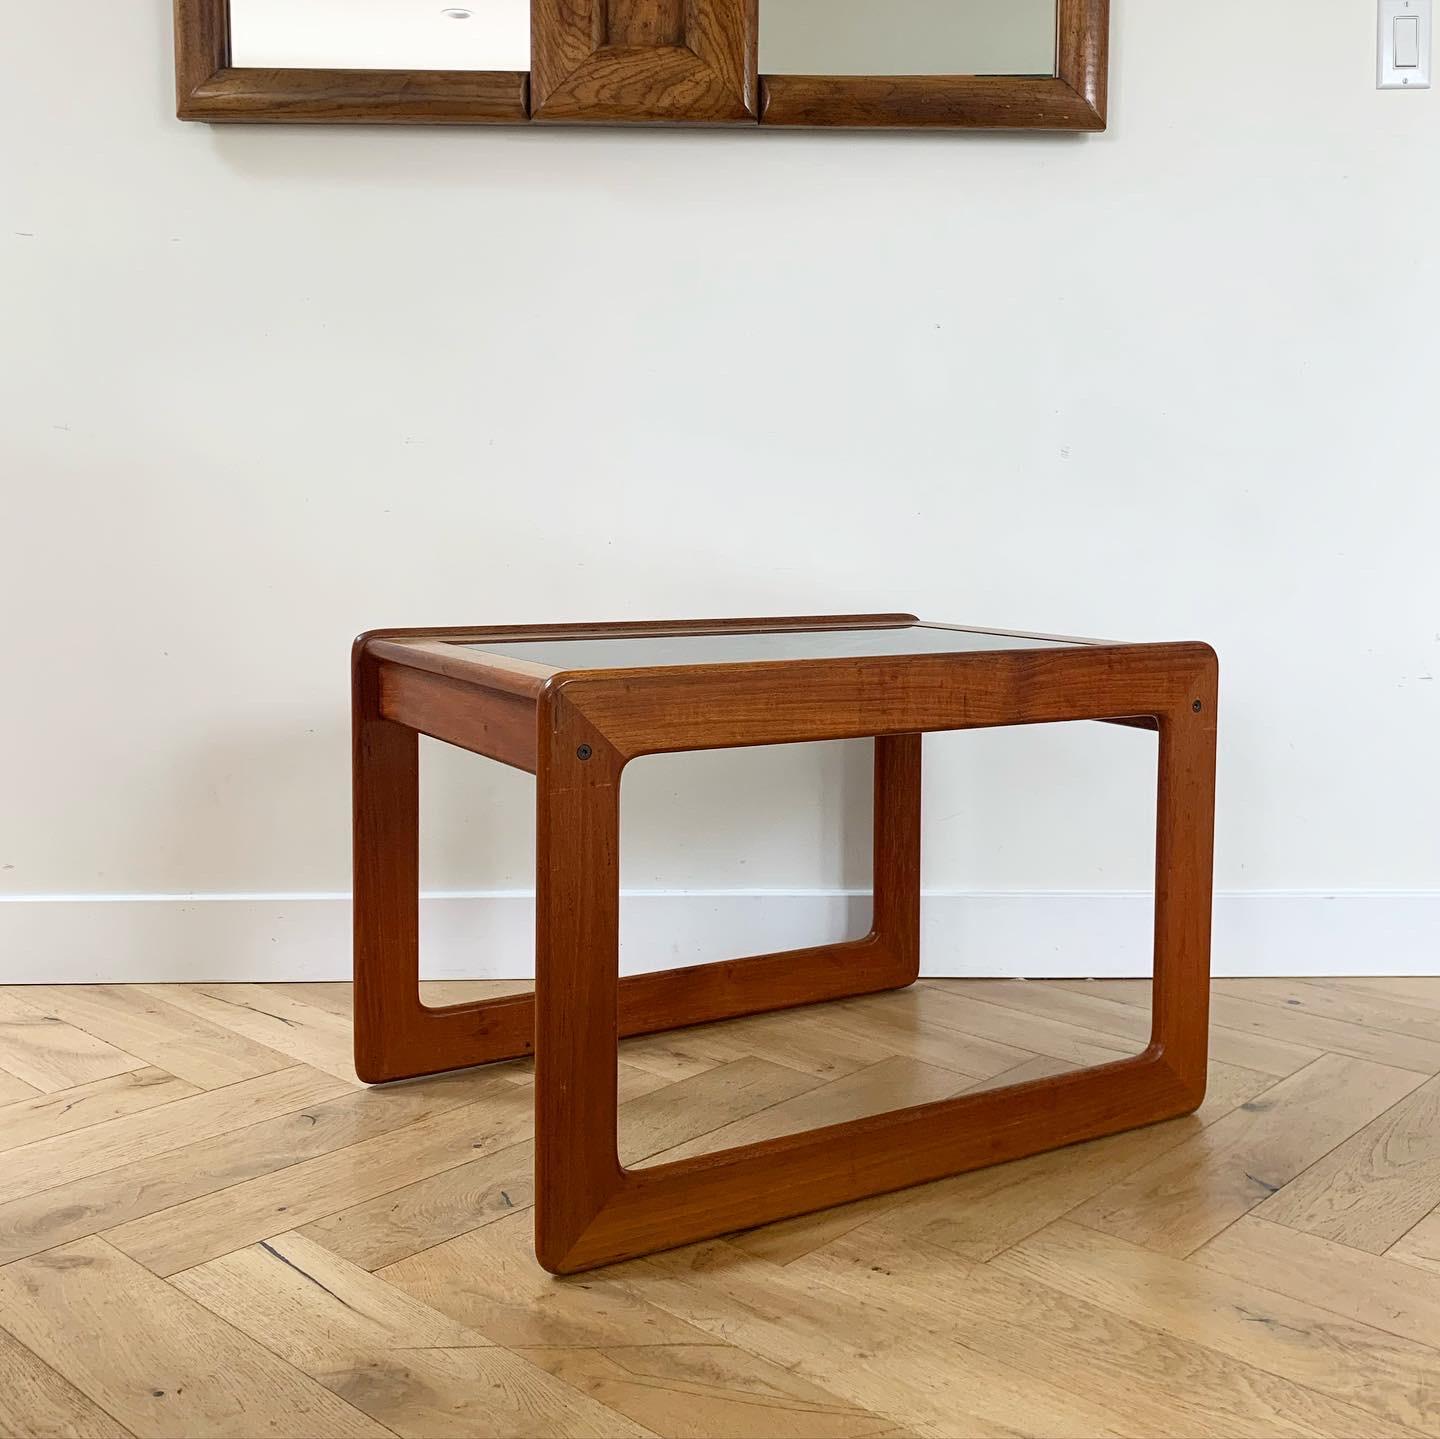 Mid-20th Century Danish Mid-Century Modern Cocktail / End Table by Komfort, 1960s